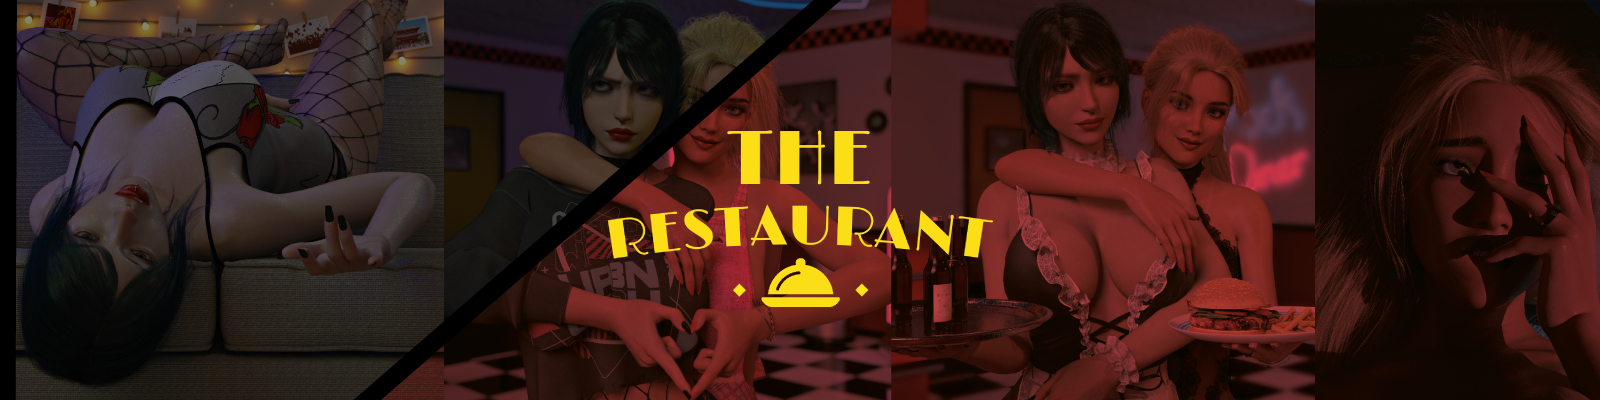 The Restaurant1.png